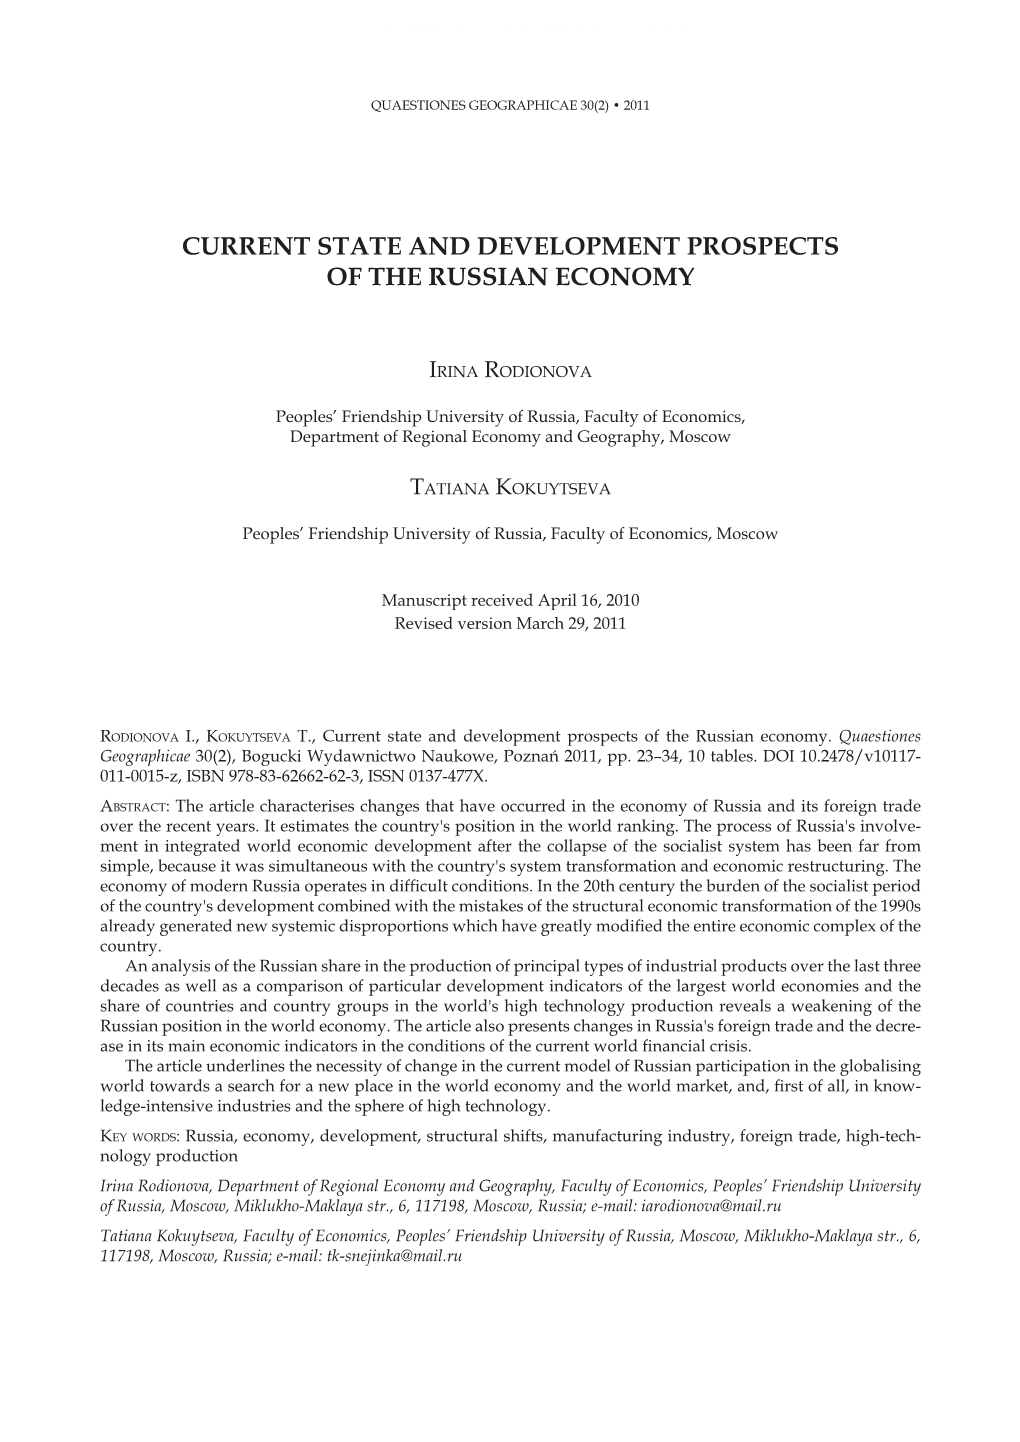 Current State and Development Prospects of the Russian Economy